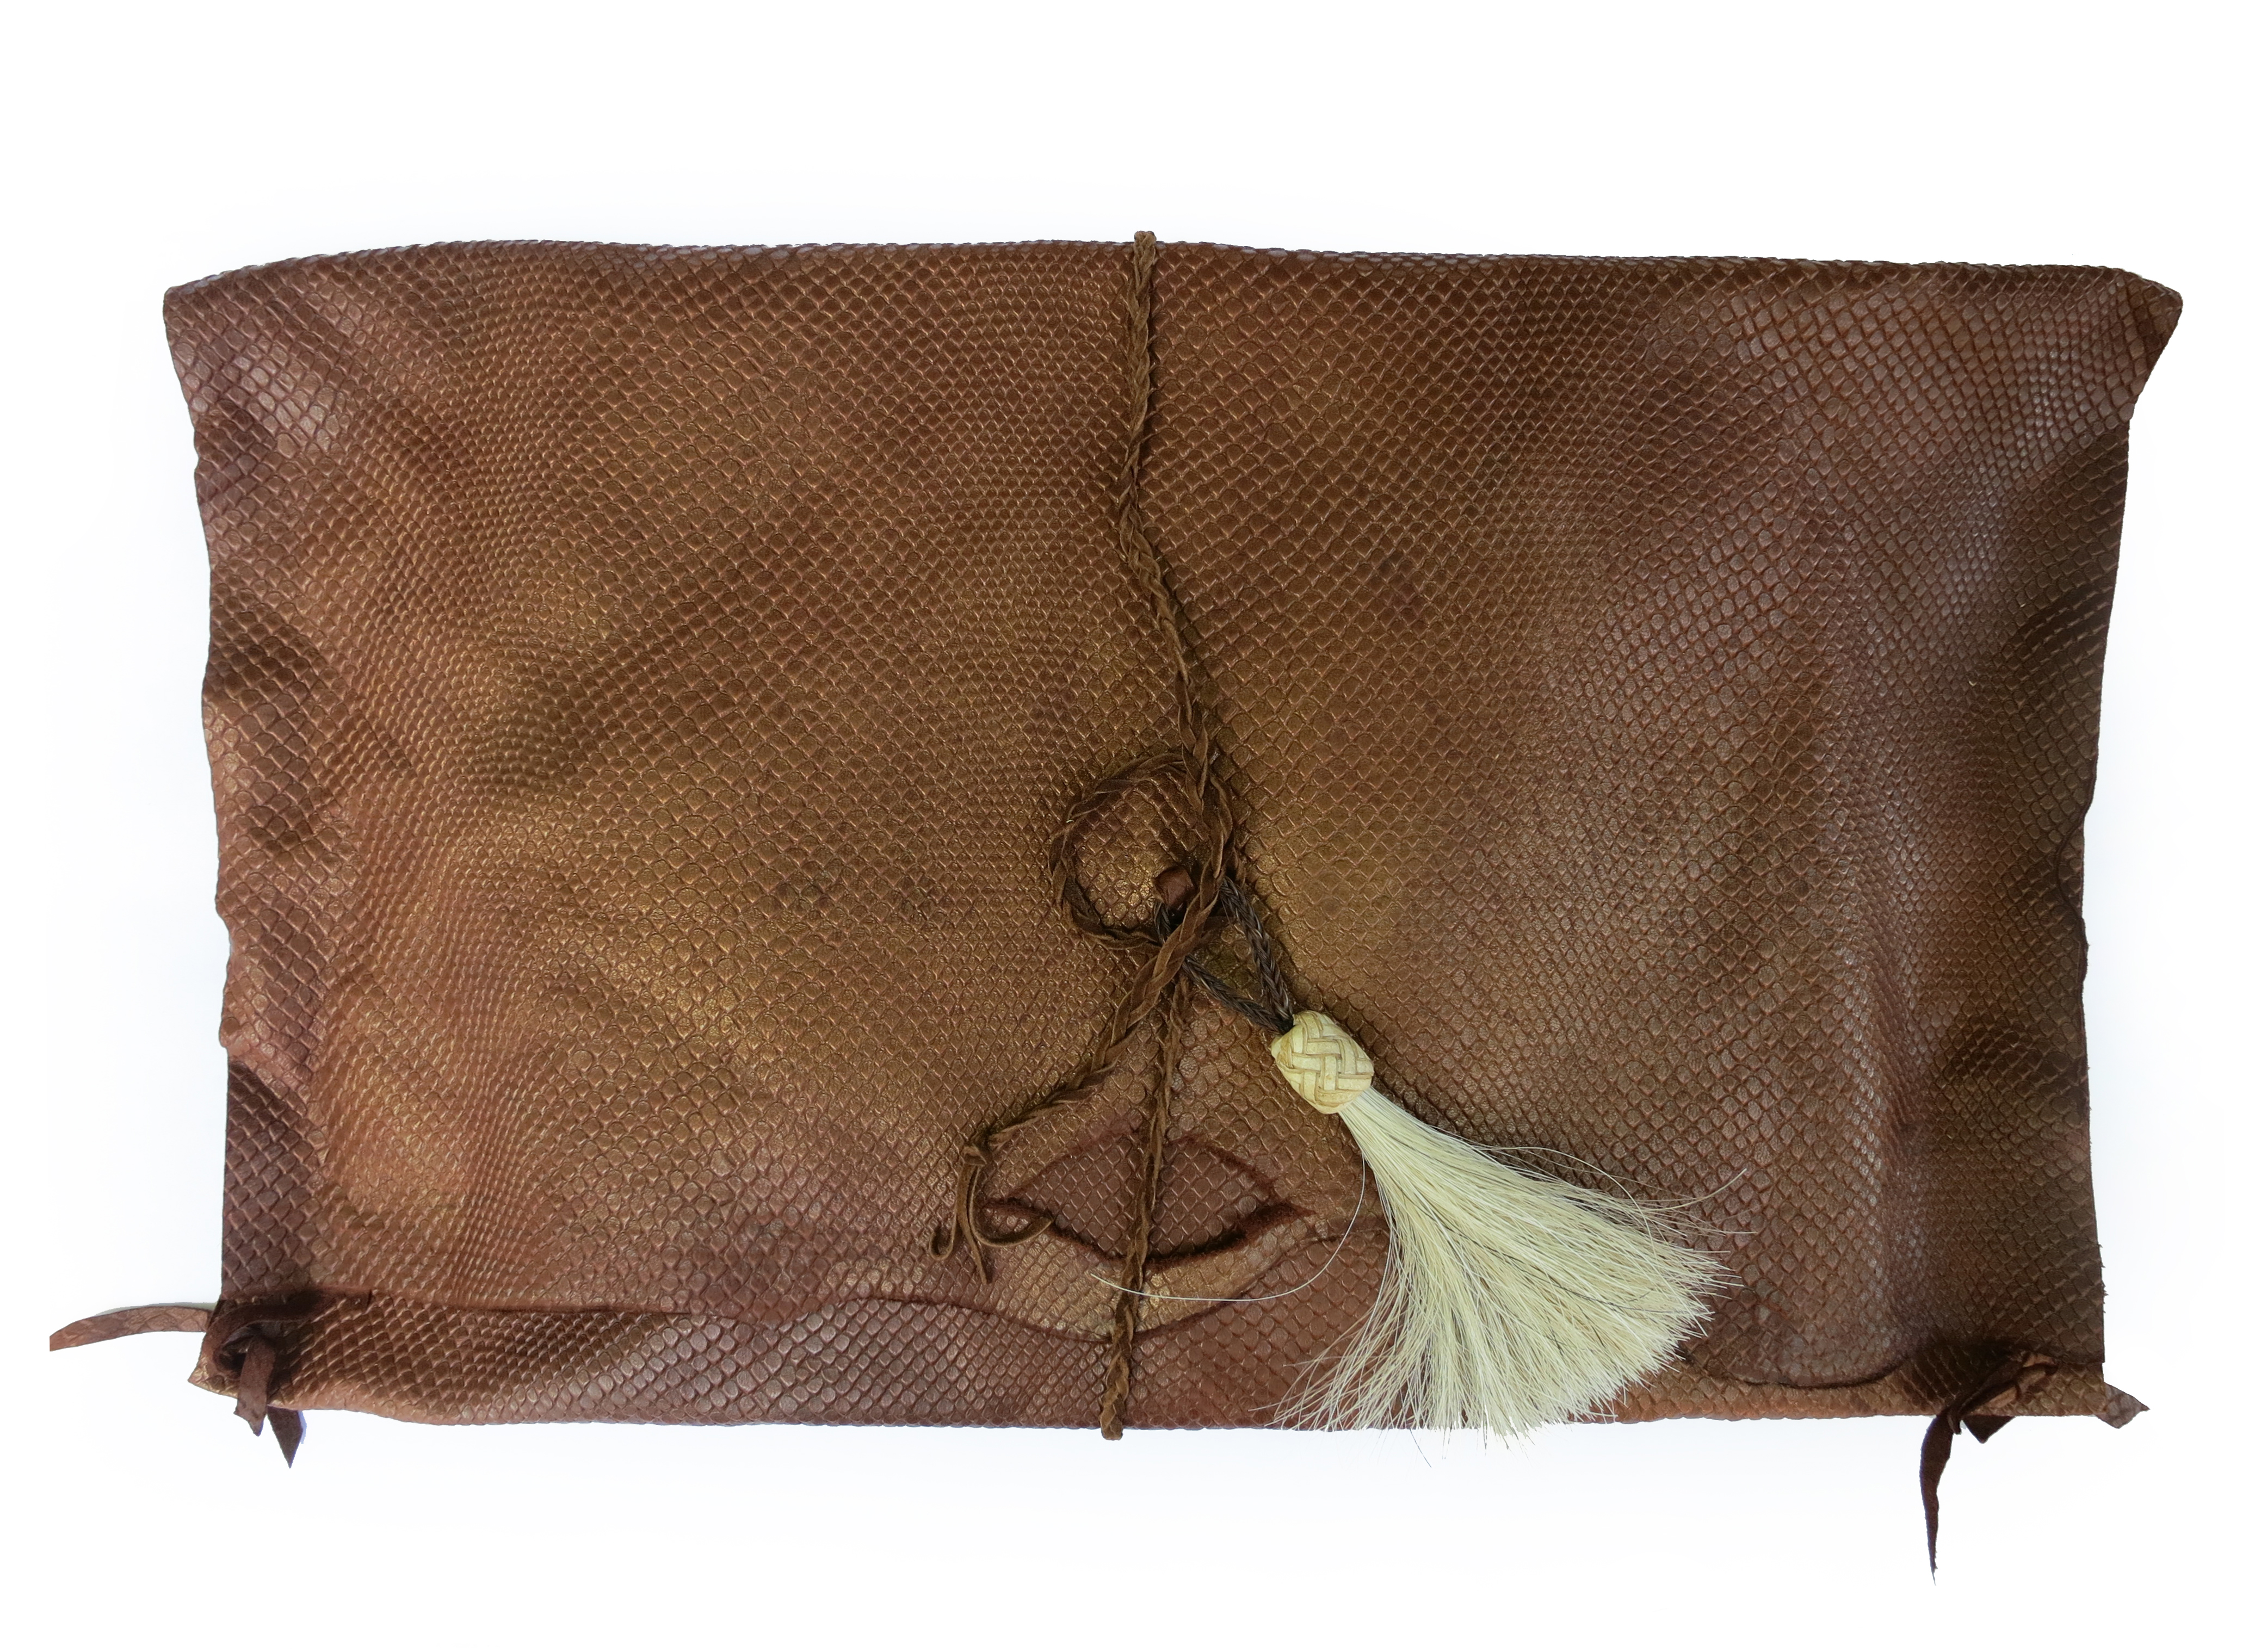 Handcrafted Metallic Leather Clutch by Jenne Rayburn